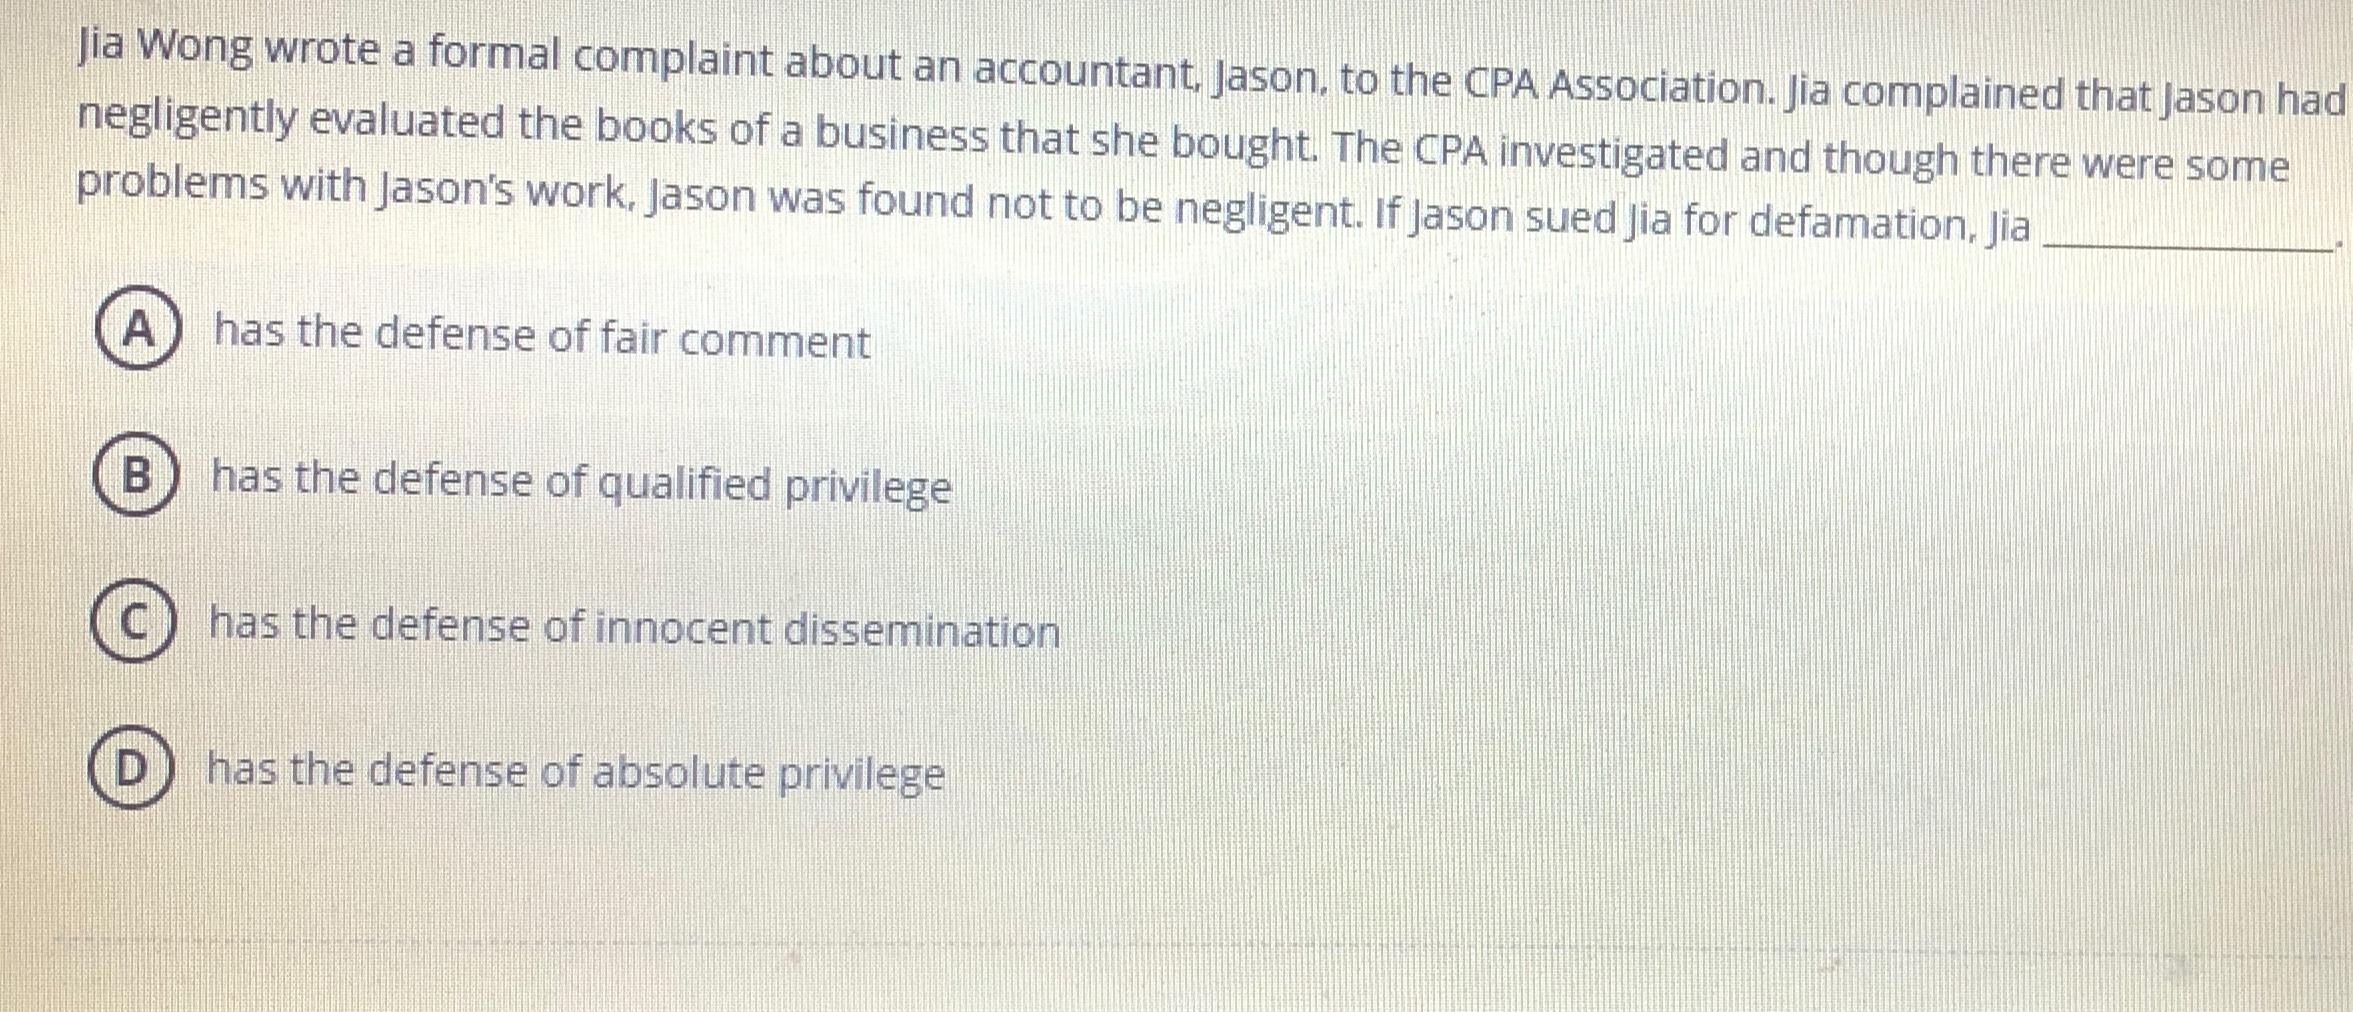 Jia Wong wrote a formal complaint about an accountant, Jason, to the CPA Association. Jia complained that